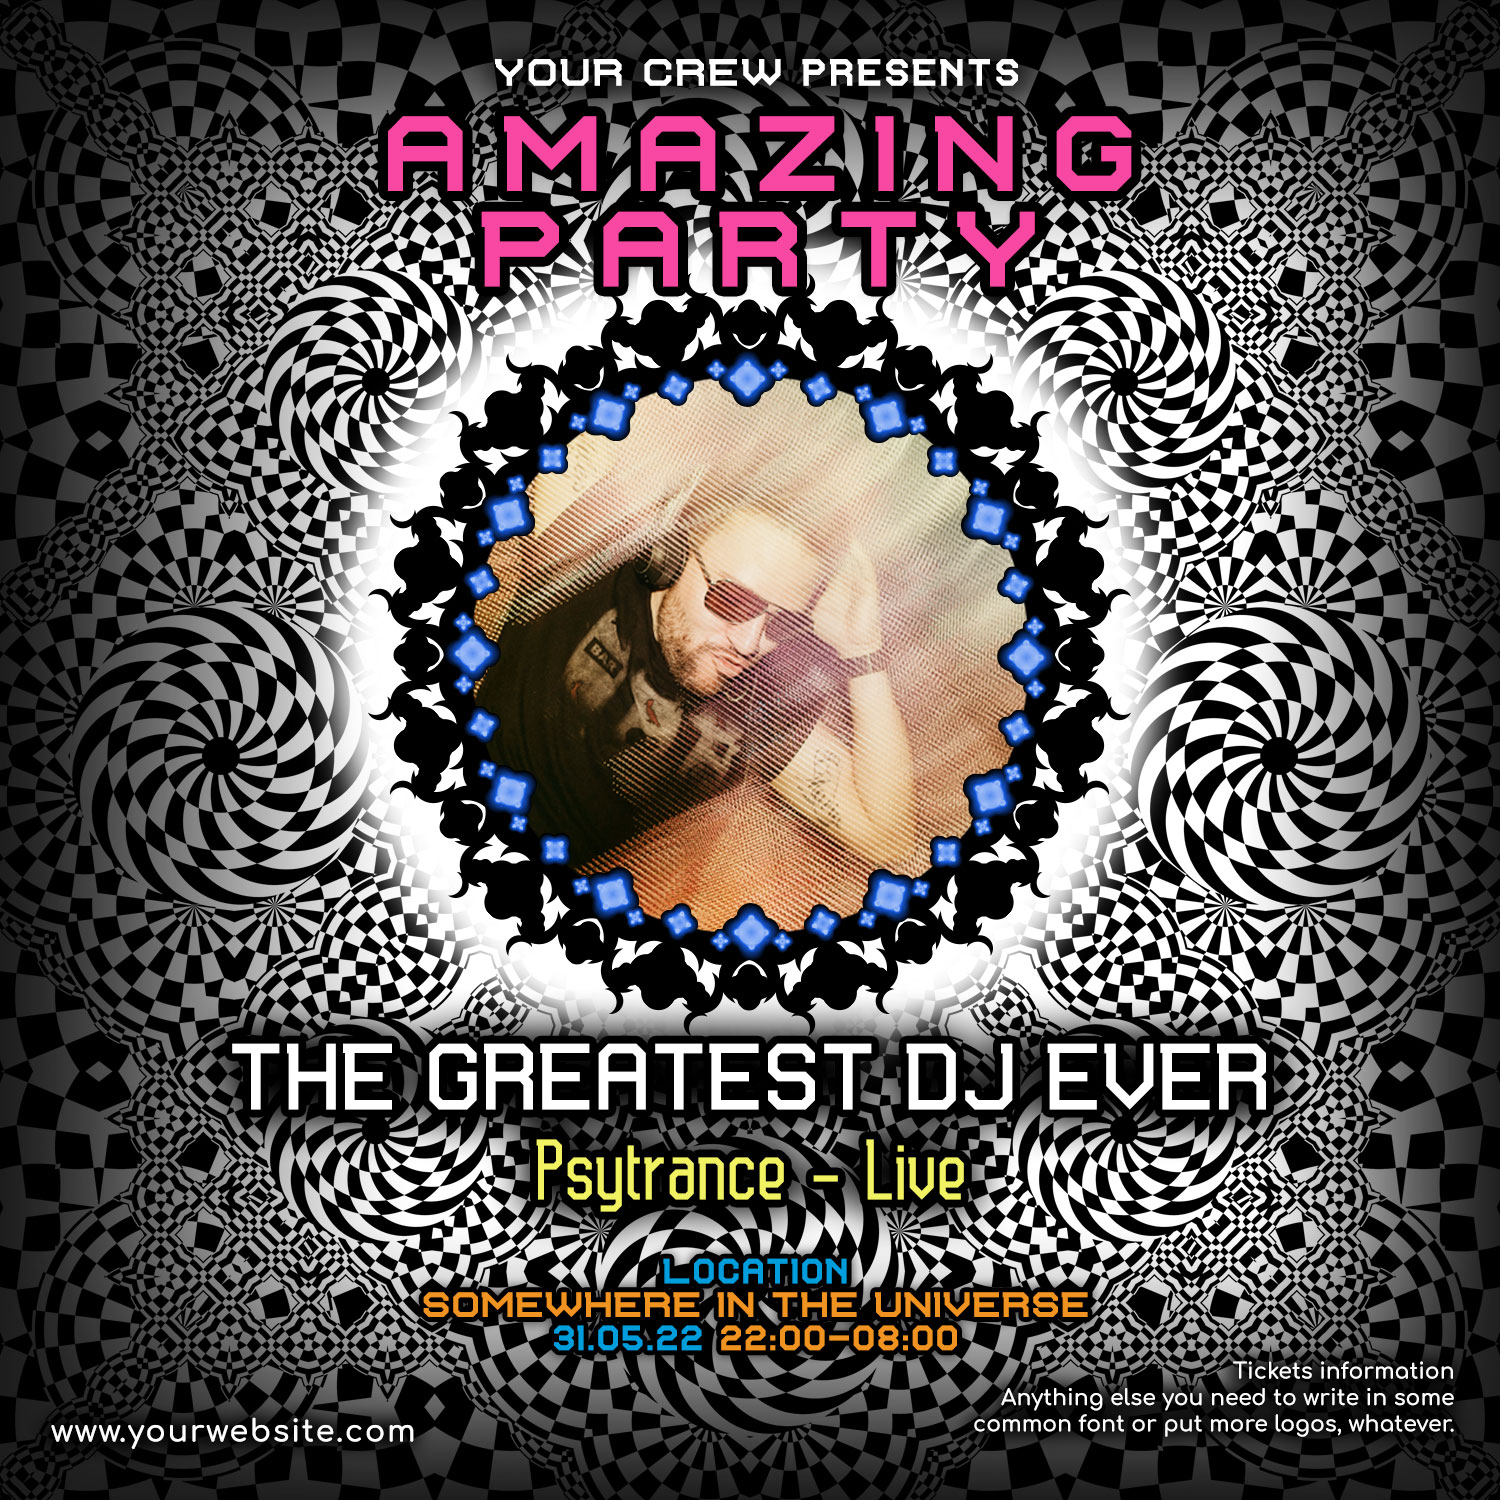 Melting Time - Free Psychedelic Trance Party Instagram Artist Promotion Photo Post